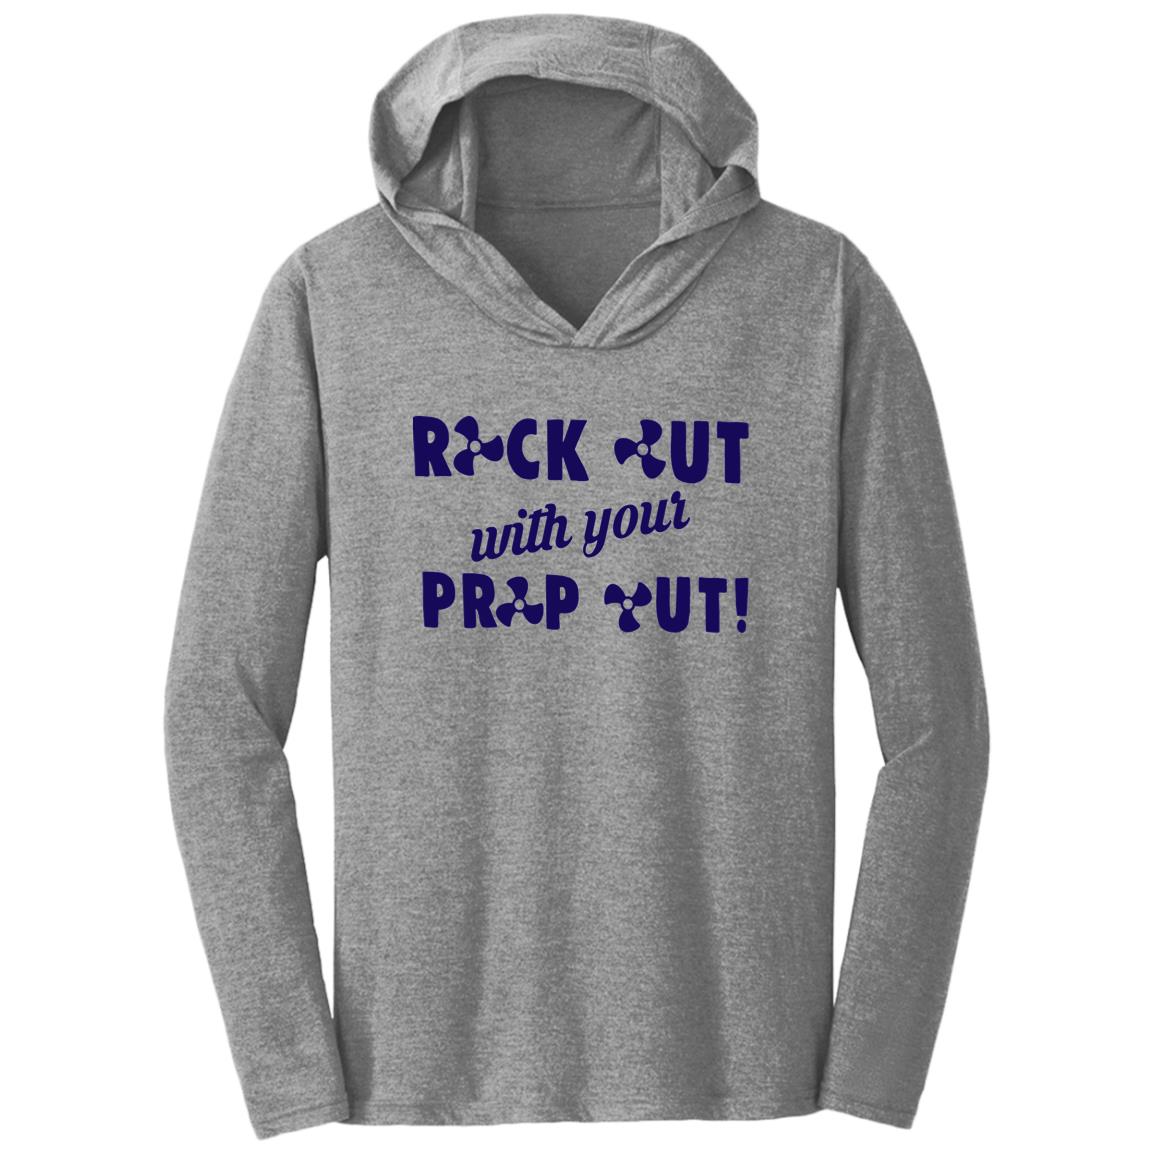 HRCL FL - Navy Rock Out with your Prop Out - 2 Sided DM139 Triblend T-Shirt Hoodie